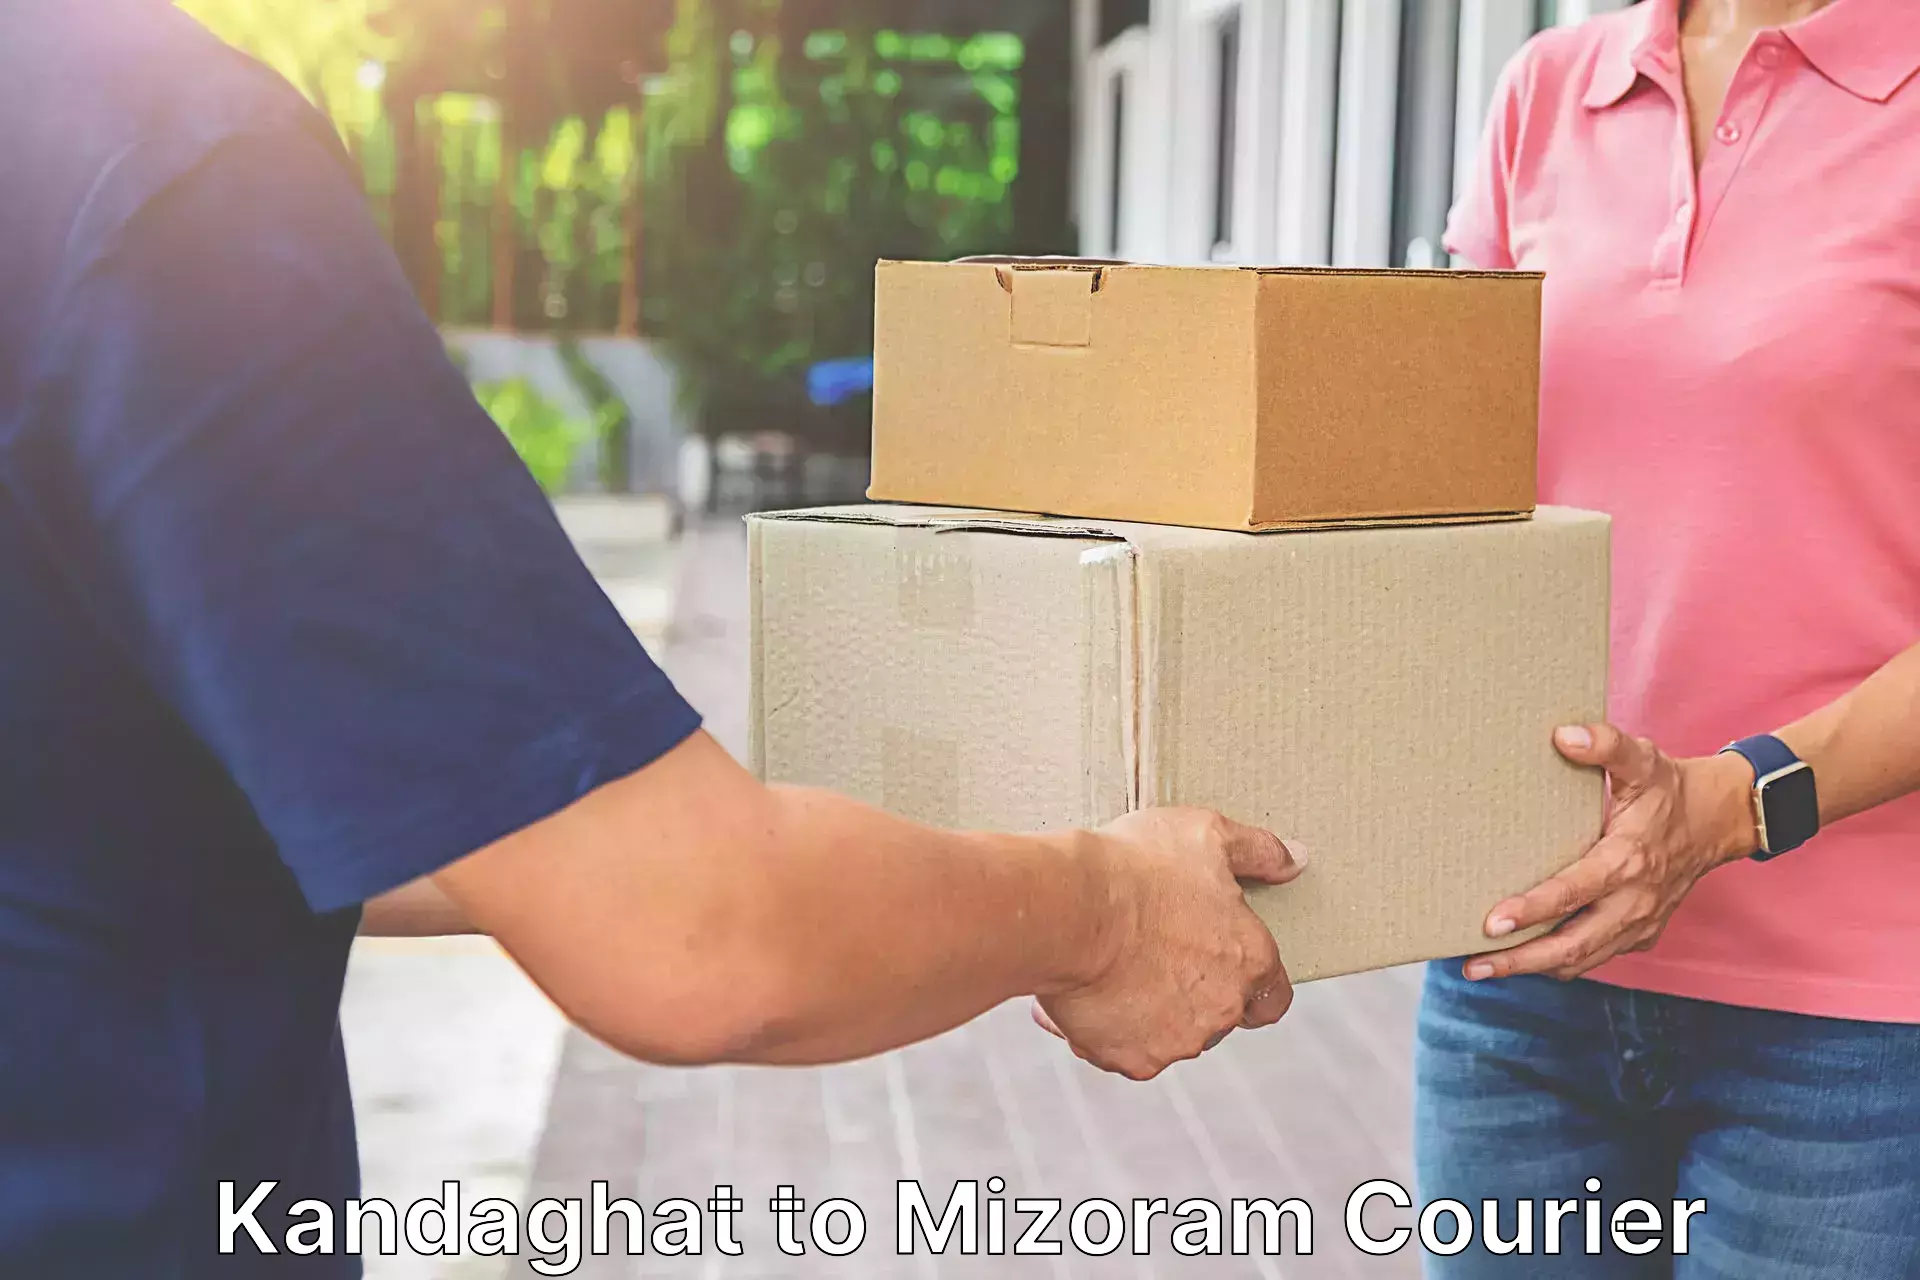 Reliable courier service Kandaghat to Mizoram